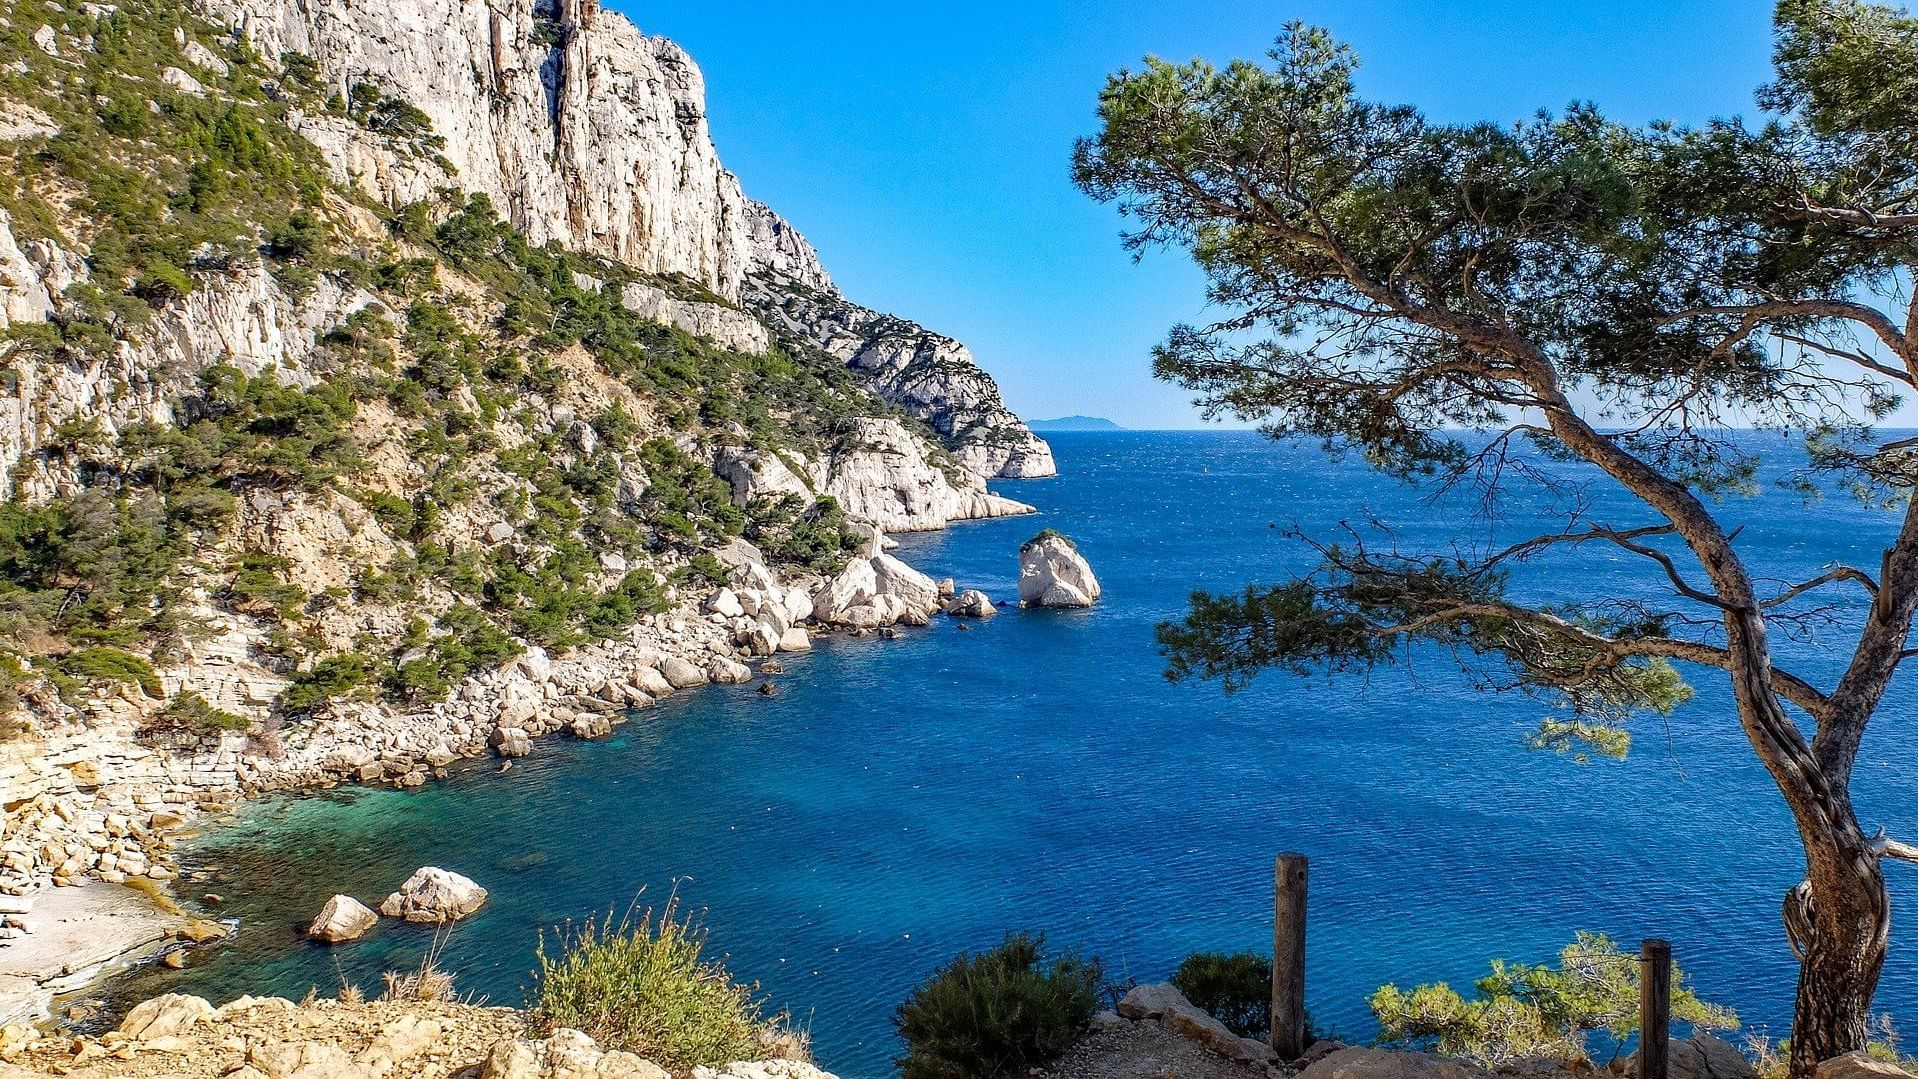 Beach view in Calanques National Park near The Original Hotels